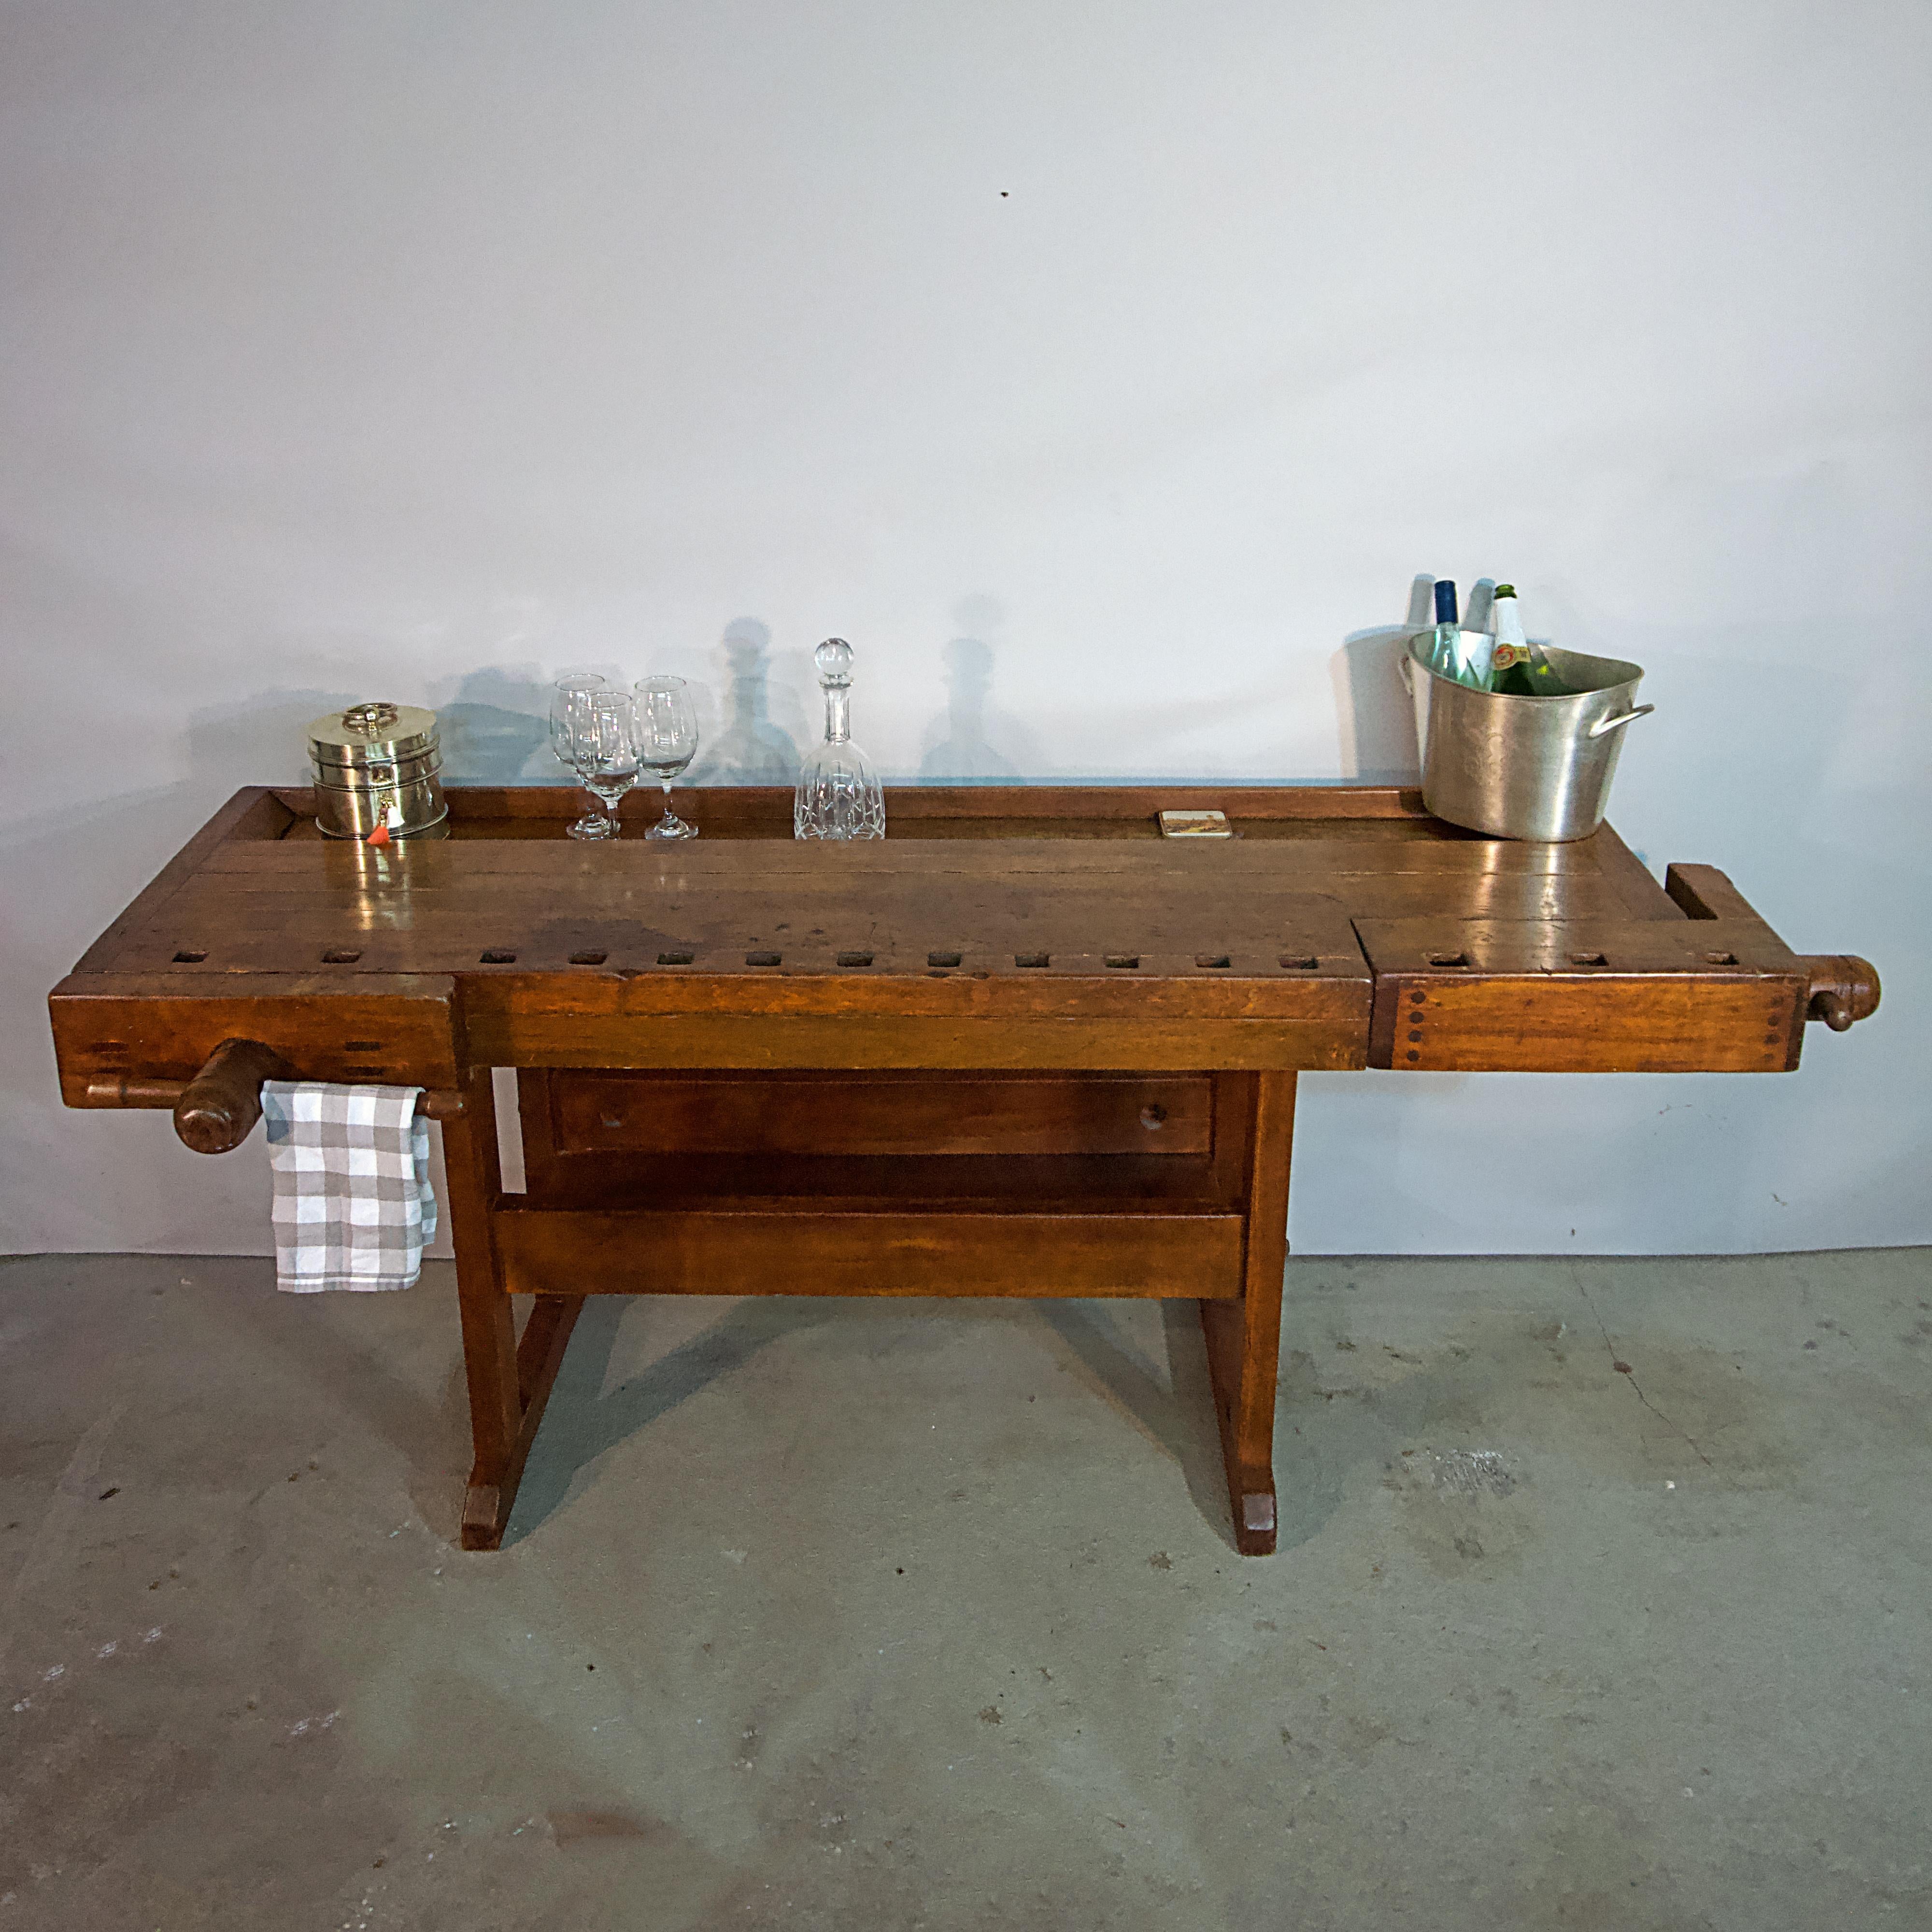 Functional early 20th century cabinet makers work bench 
as sideboard, serving table or bar.